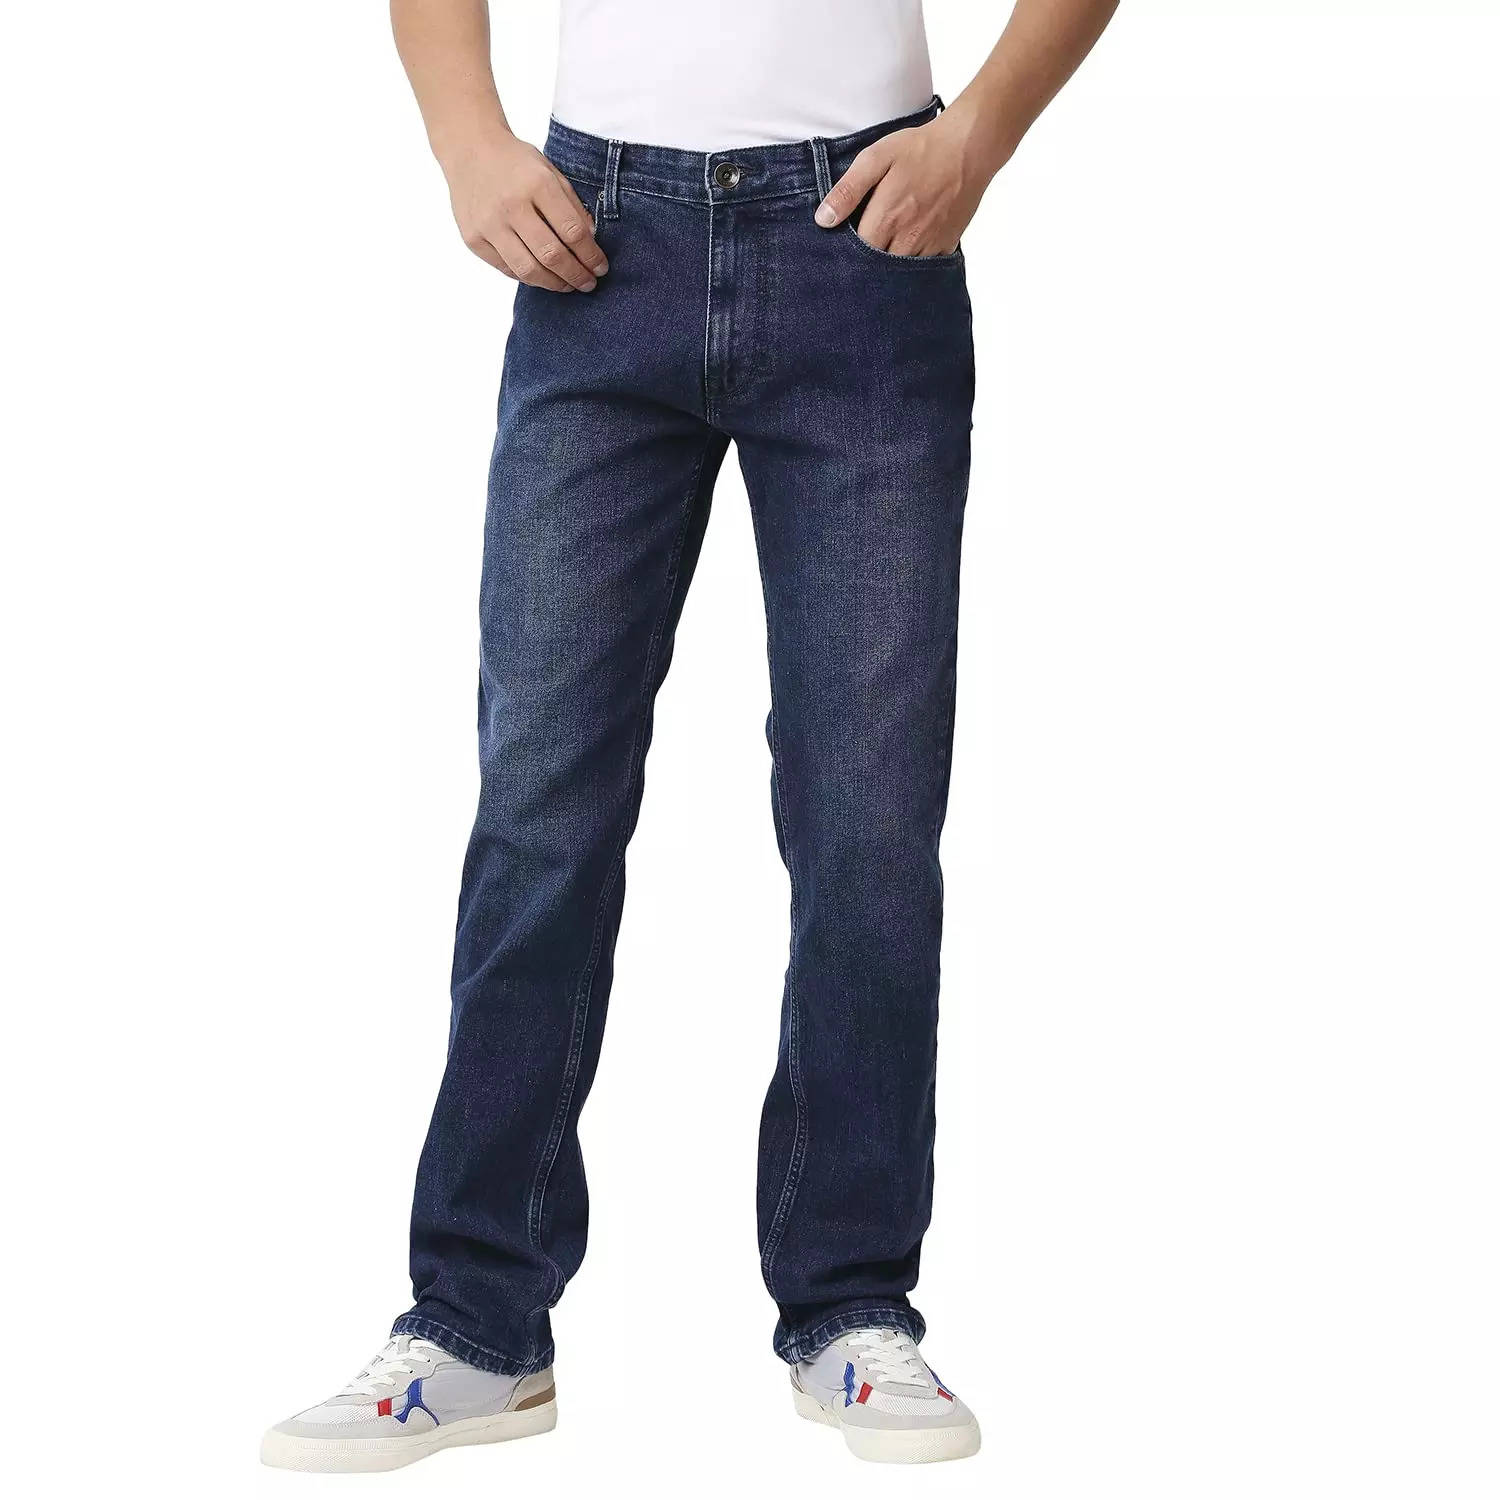 Jeans for Men Under 3000: 6 Best Jeans for Men Under 3000 in India to  Complement Every Look - The Economic Times